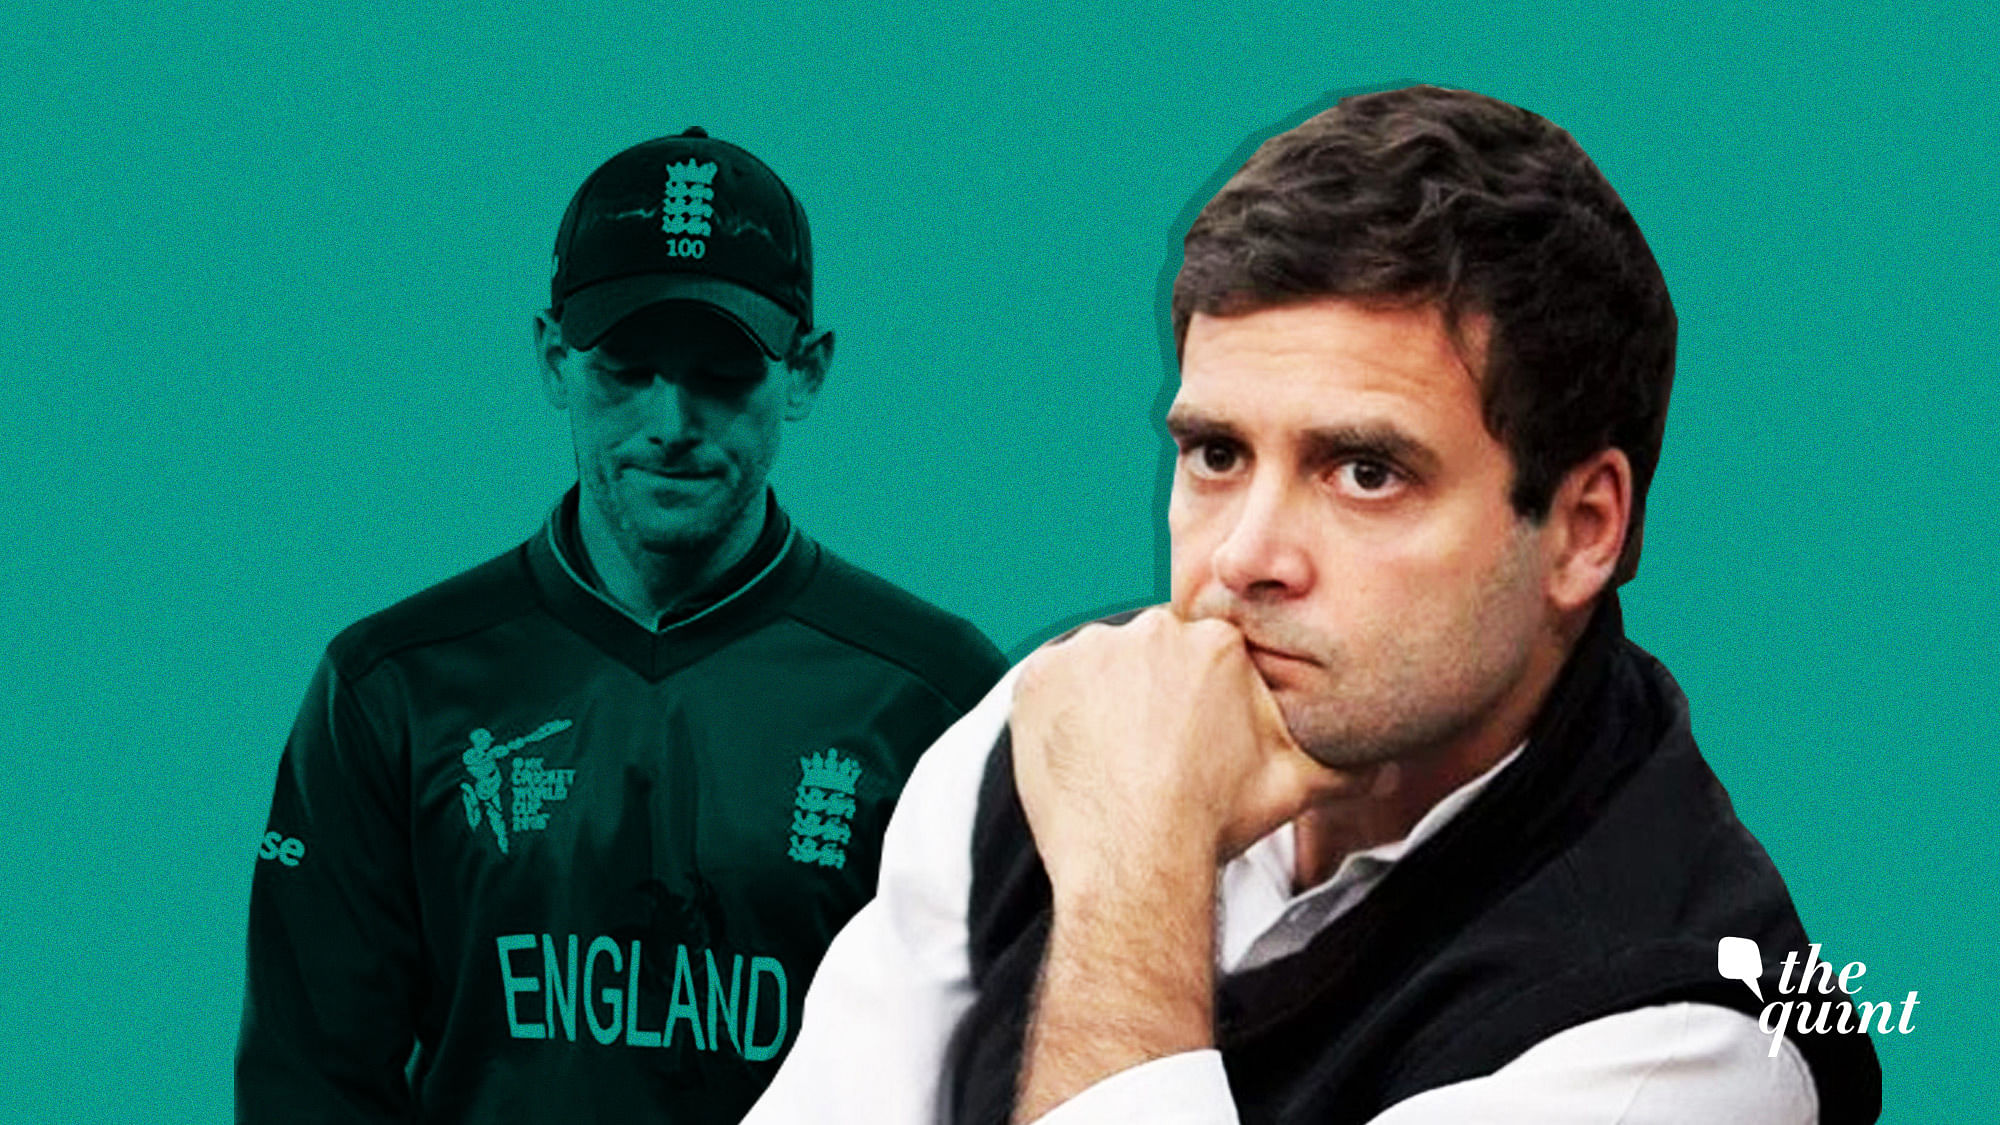 England followed six simple rules to recover from the thrashing at 2015 World Cup. Can the Congress follow suit?